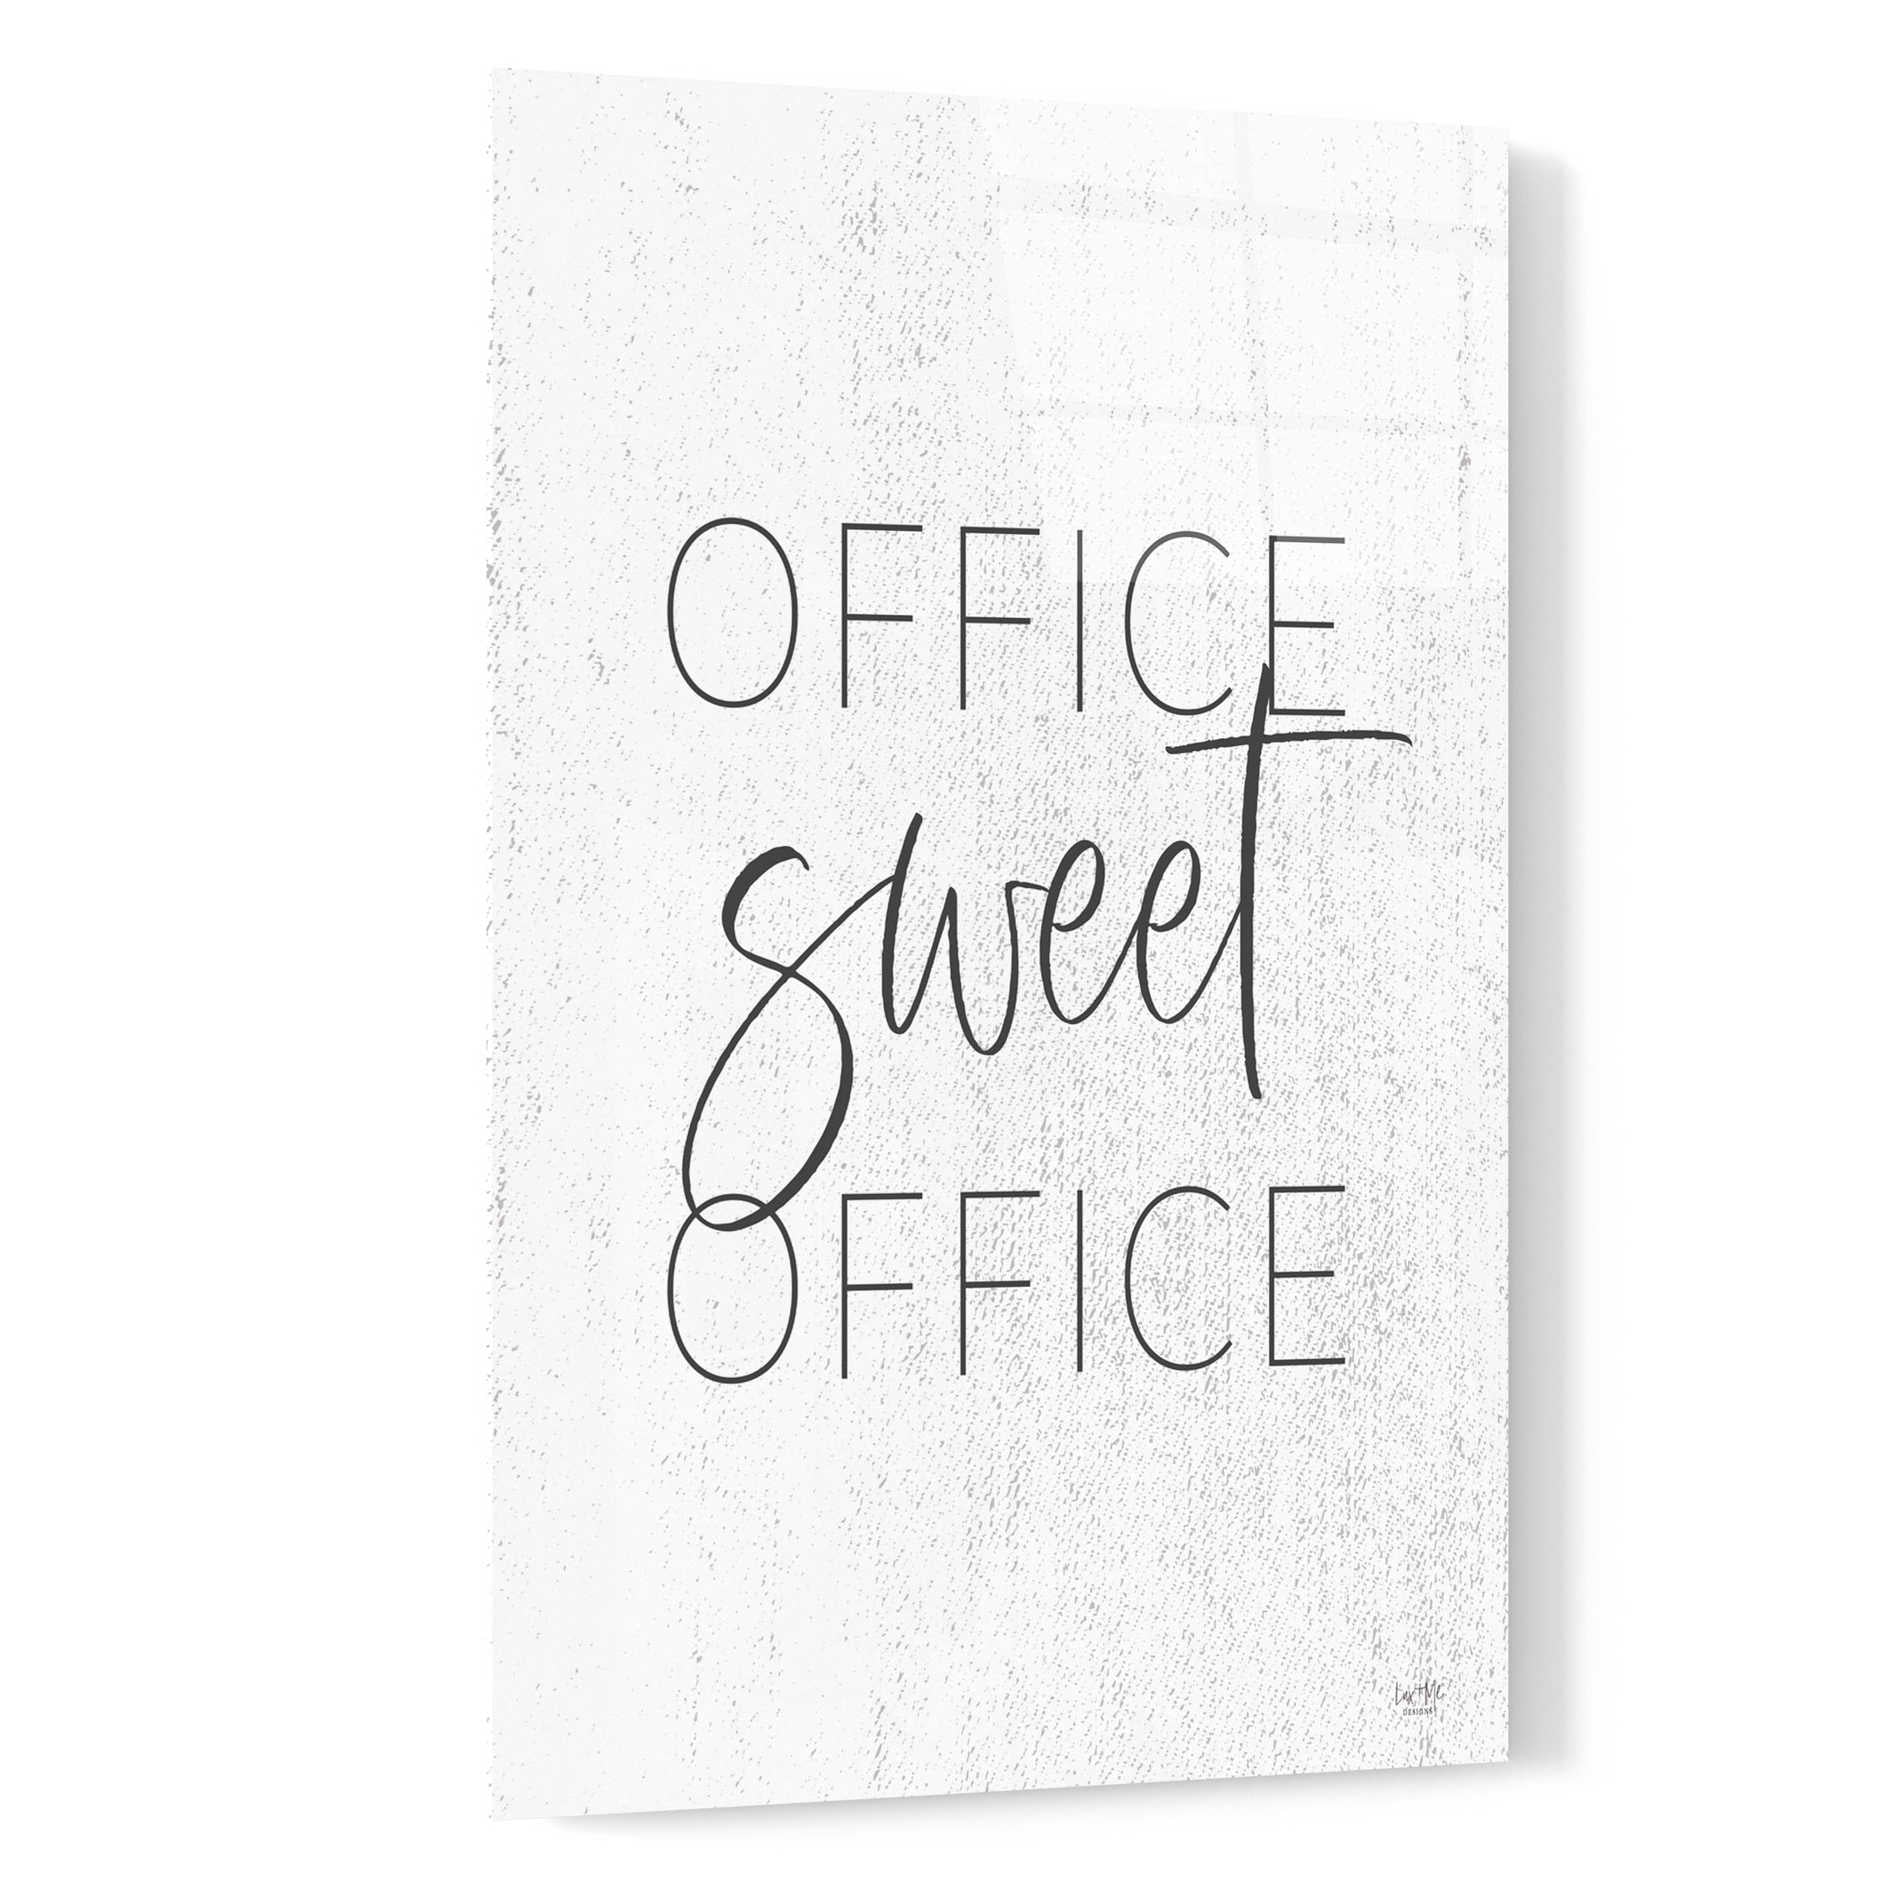 Epic Art 'Office Sweet Office' by Lux + Me, Acrylic Glass Wall Art,16x24